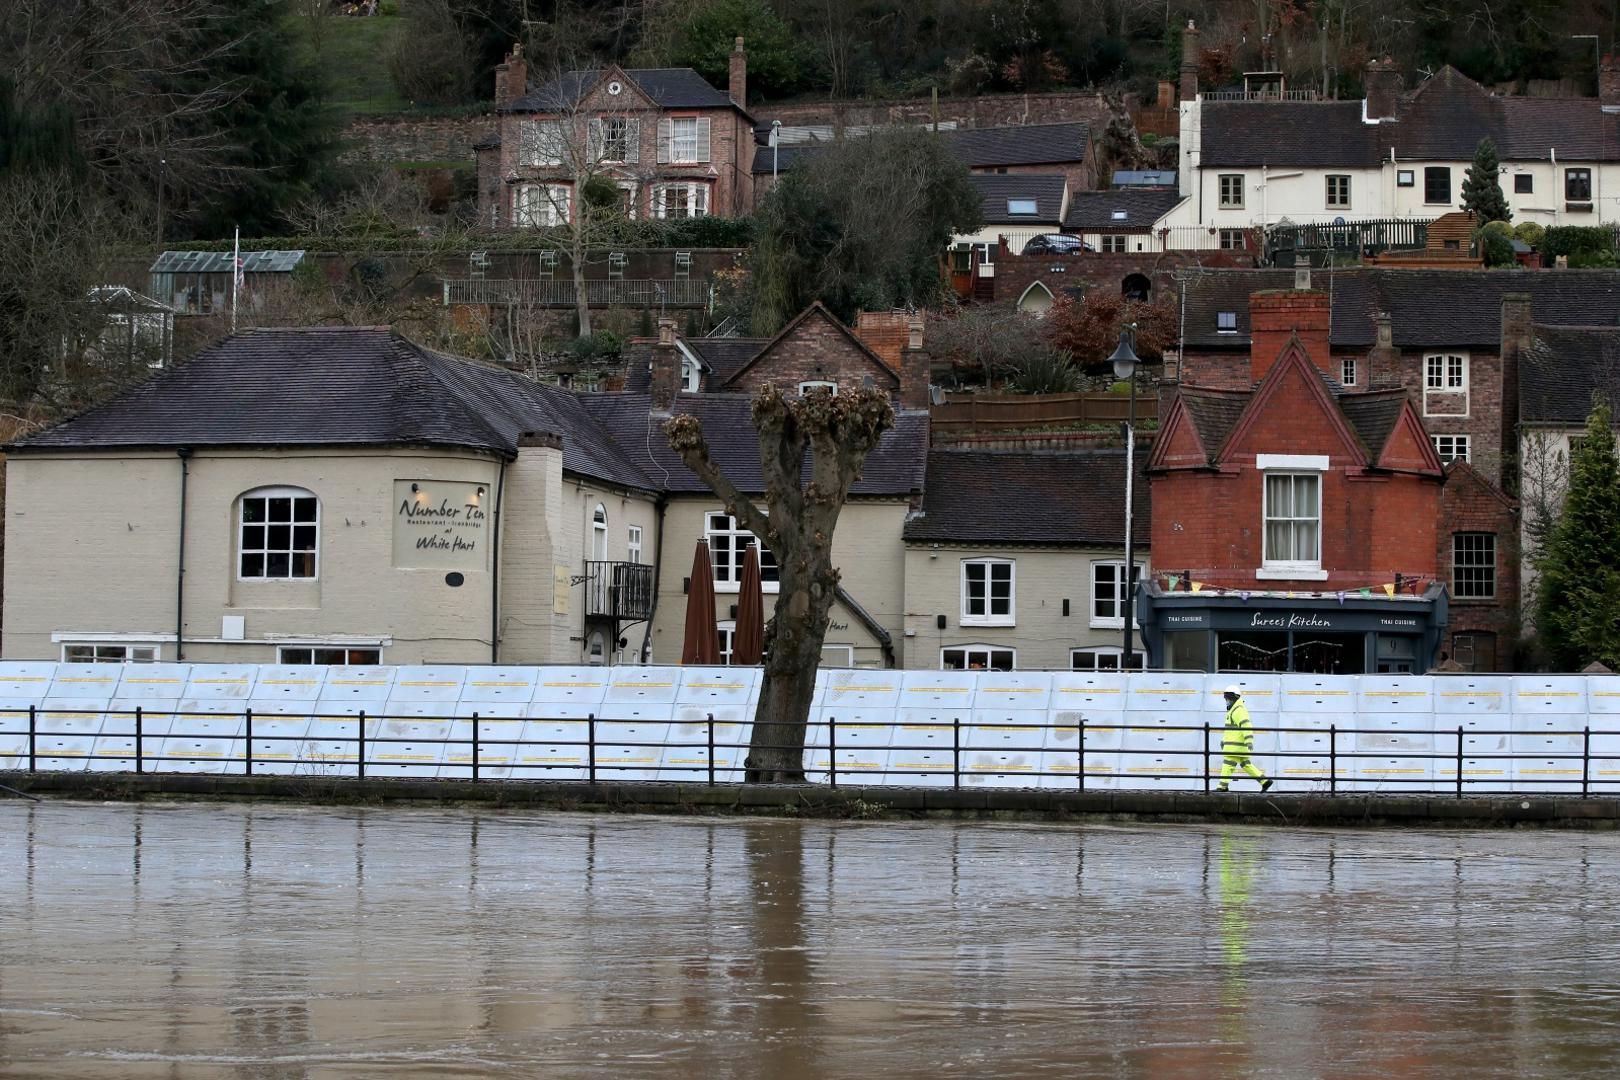 Winter weather Dec 24th 2020 Flood defences have been installed in Ironbridge, Shropshire, ahead of Storm Bella. Nick Potts  Photo: PA Images/PIXSELL